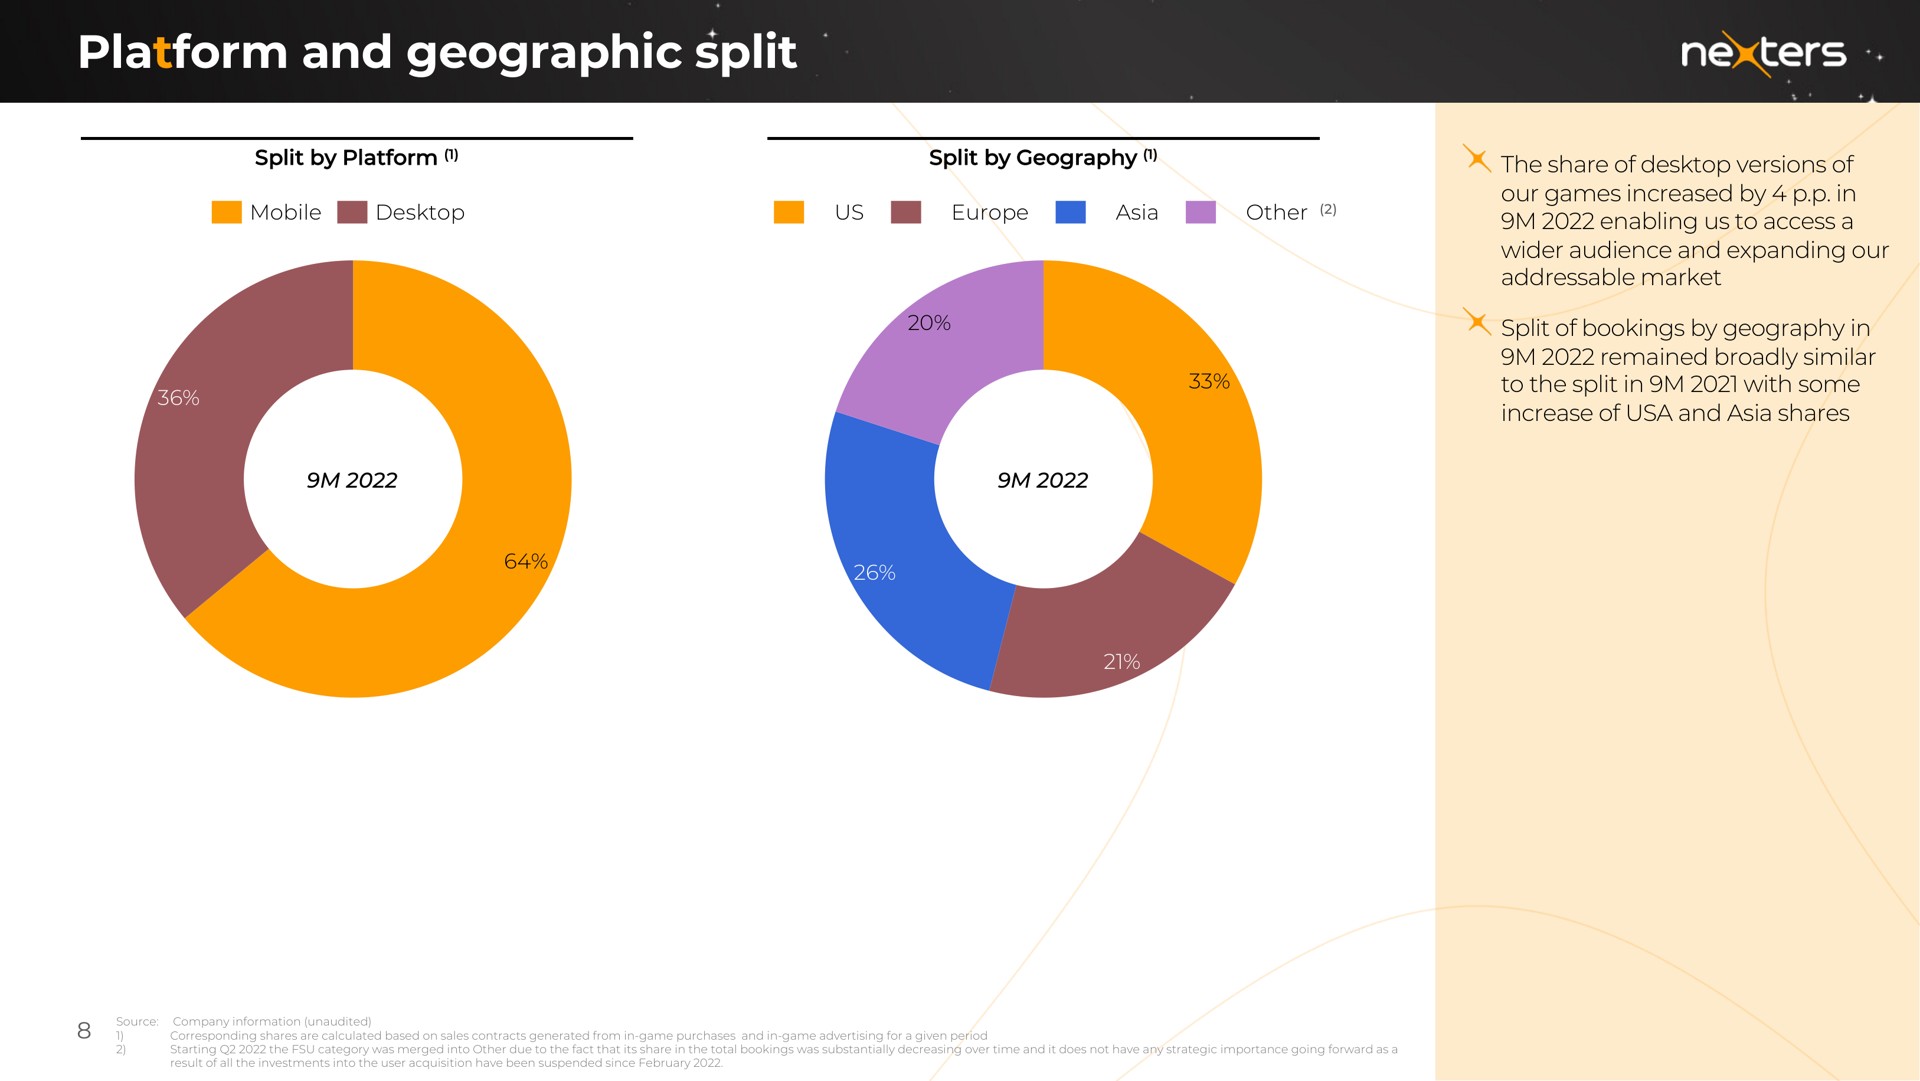 platform and geographic split the share of versions of our games increased by in enabling us to access a audience and expanding our market split of bookings by geography in remained broadly similar to the split in with some increase of and shares | Nexters